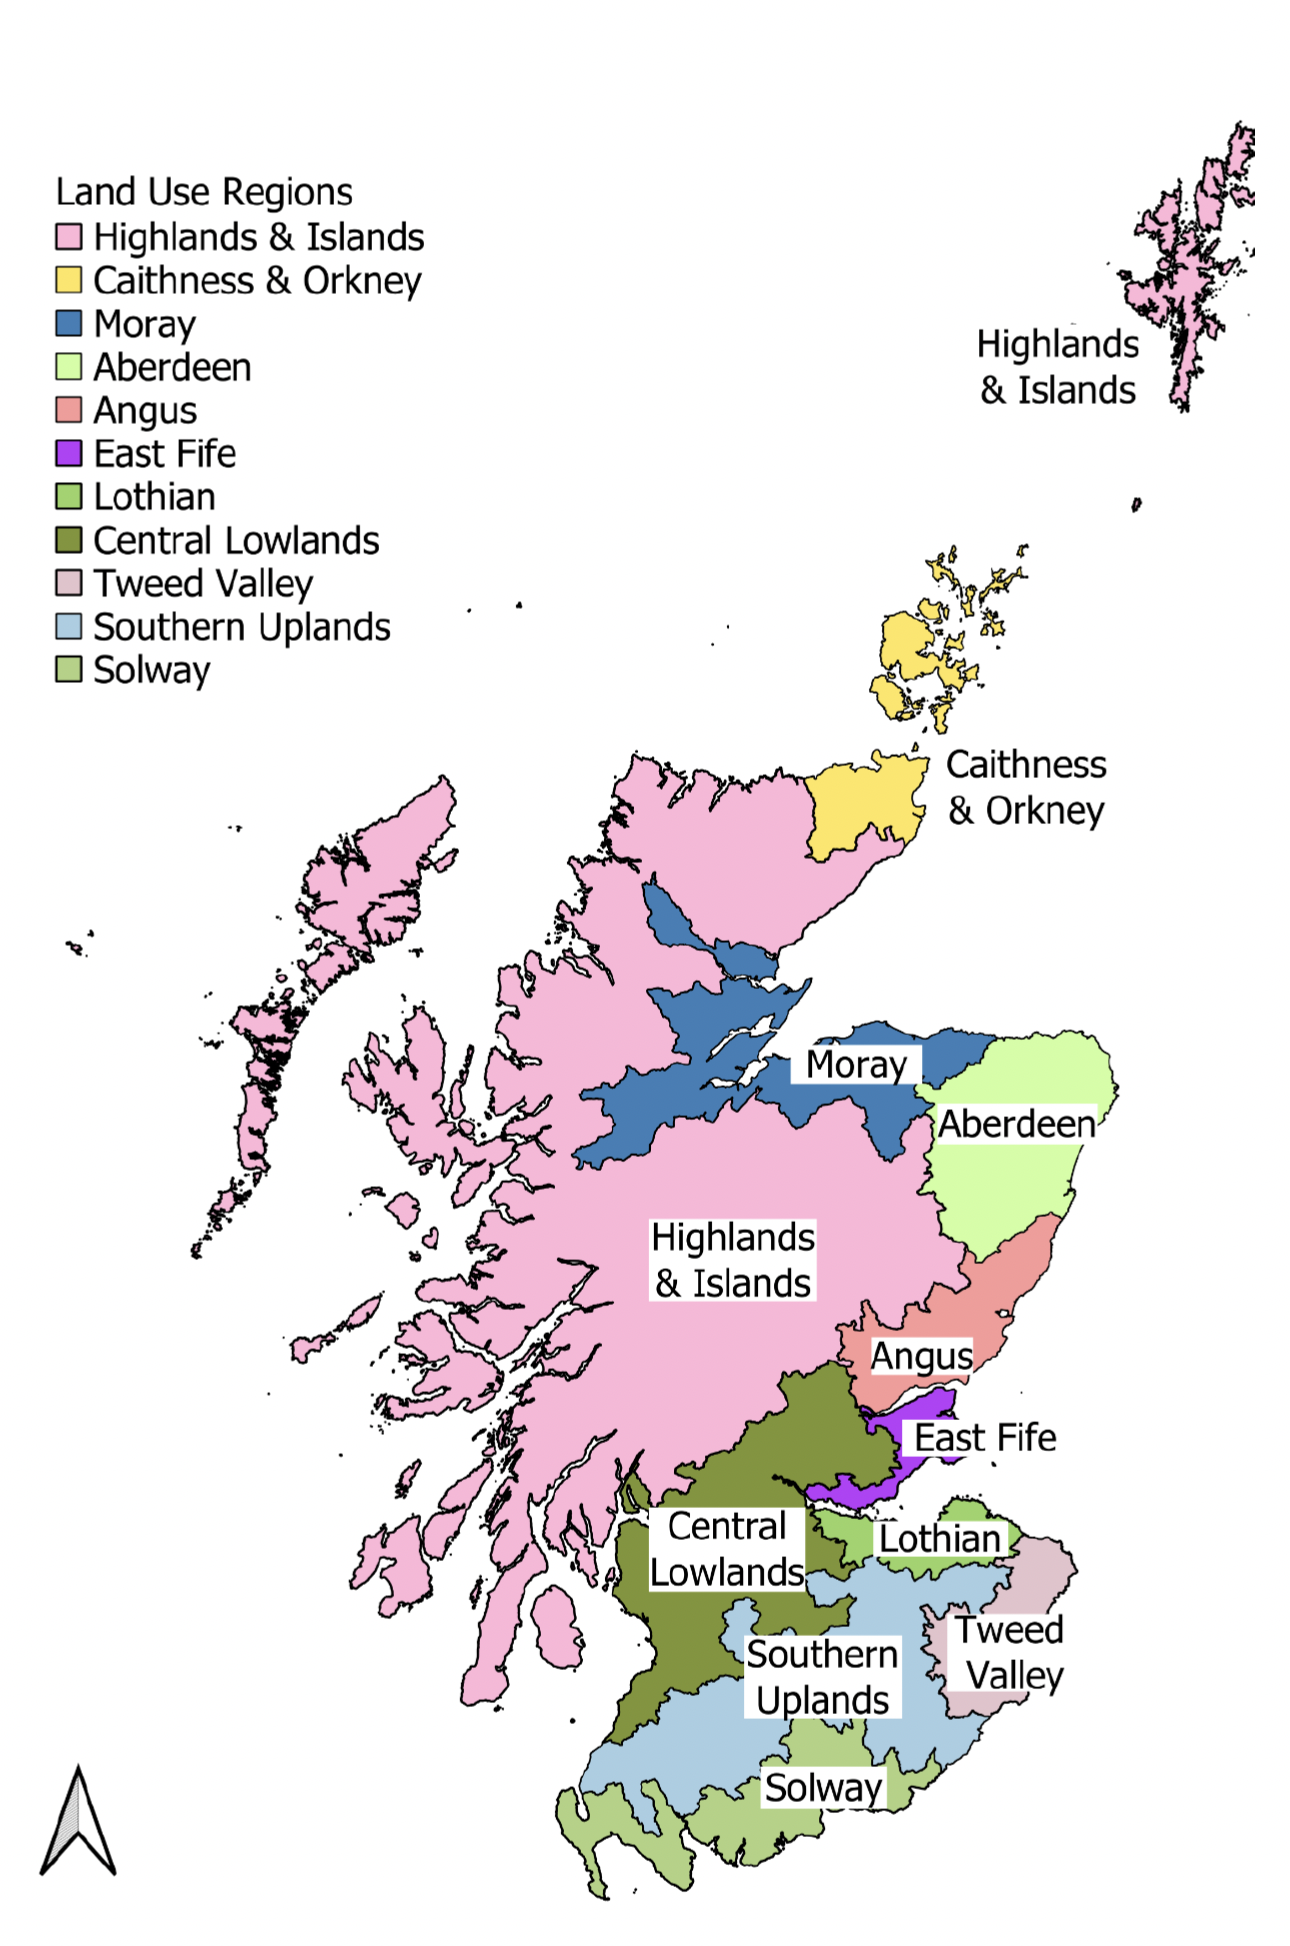 A map showing Scotland divided into 11 land use regions – Highlands and Islands, Caithness and Orkney, Moray, Aberdeen, Angus, East Fife, Lothian, Central Lowlands, Tweed Valley, Southern Uplands and Solway. 